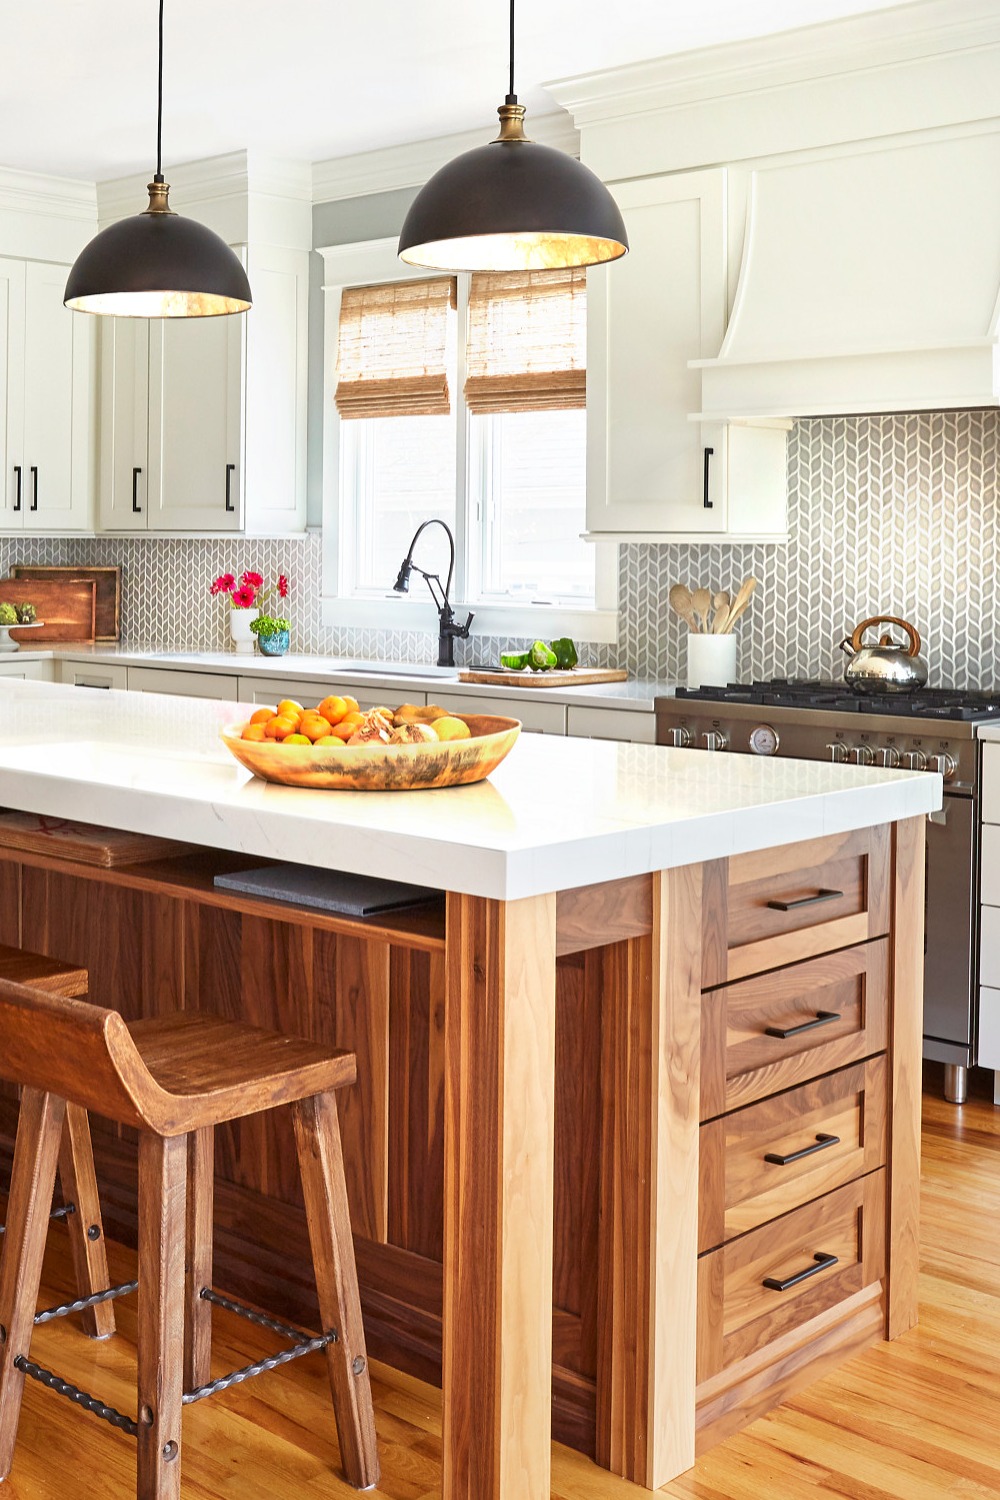 Expect To See Kitchen Trends For 2023 Cabinets Materials Wood Interior Lighting Backsplash Kitchens Create Appliances Key